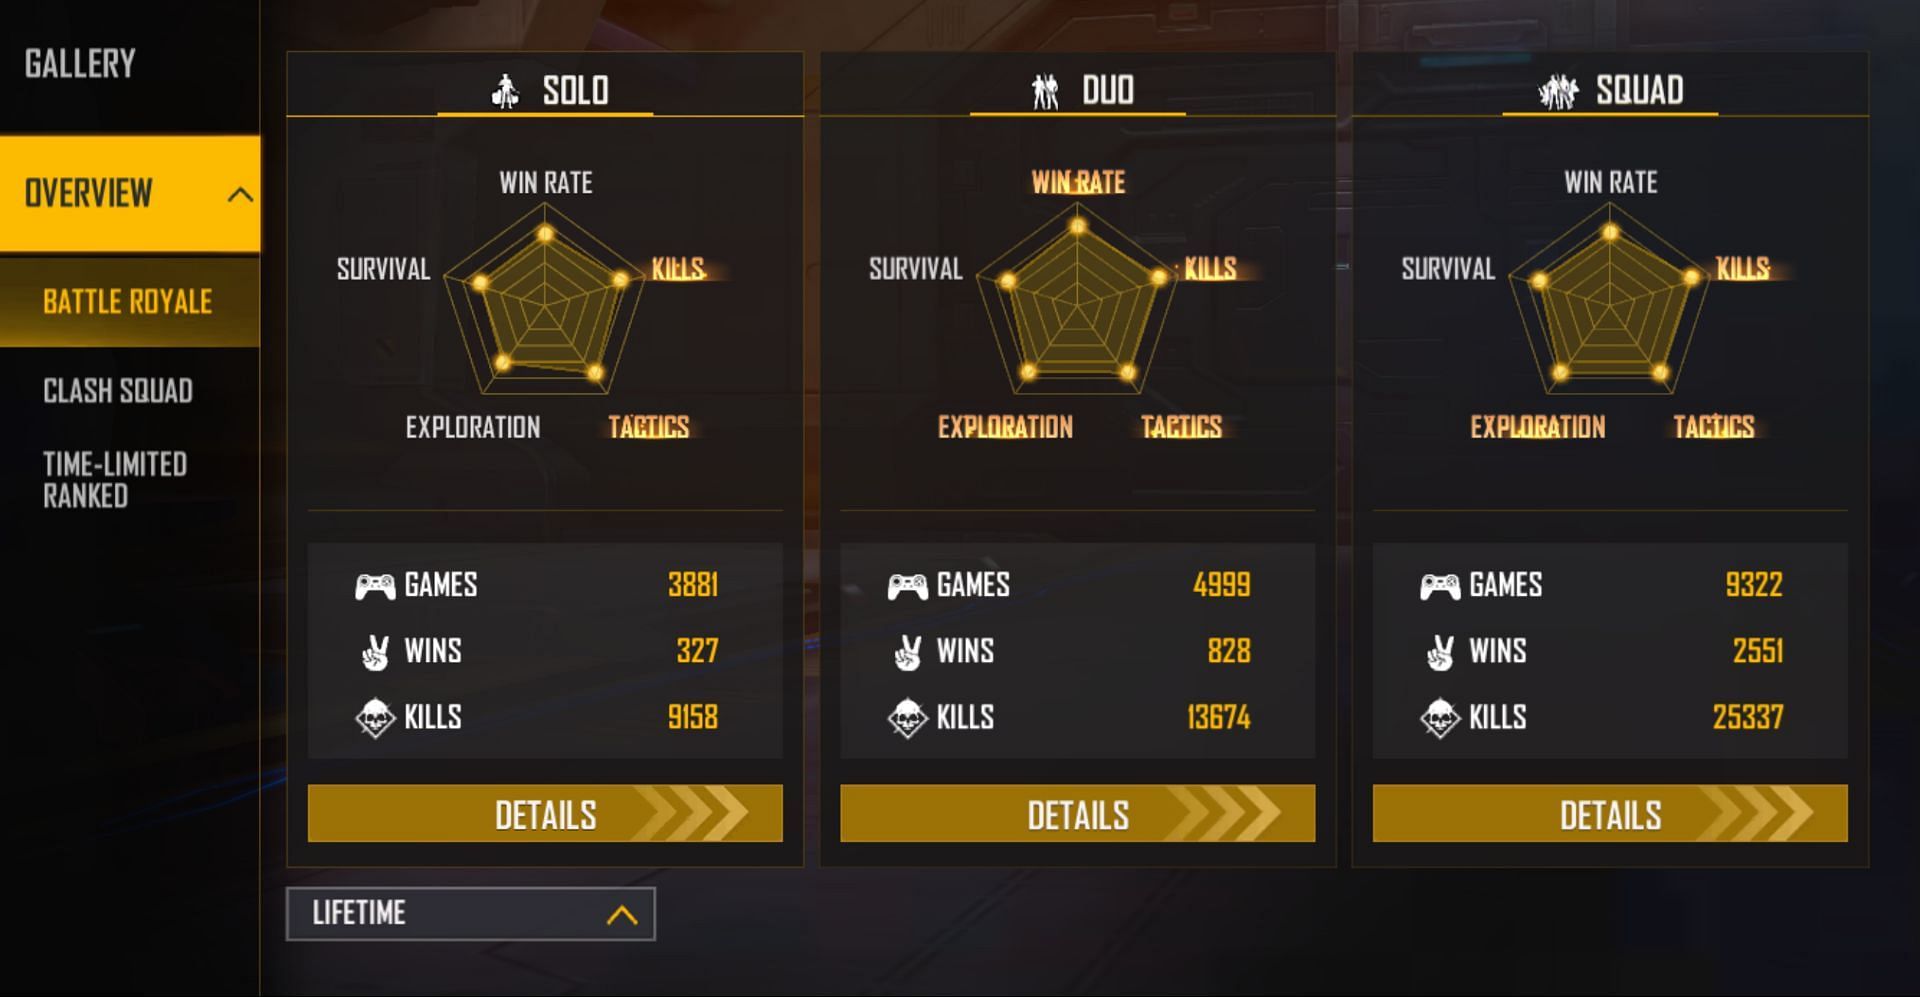 He has great lifetime stats within the battle royale mode (Image via Garena)